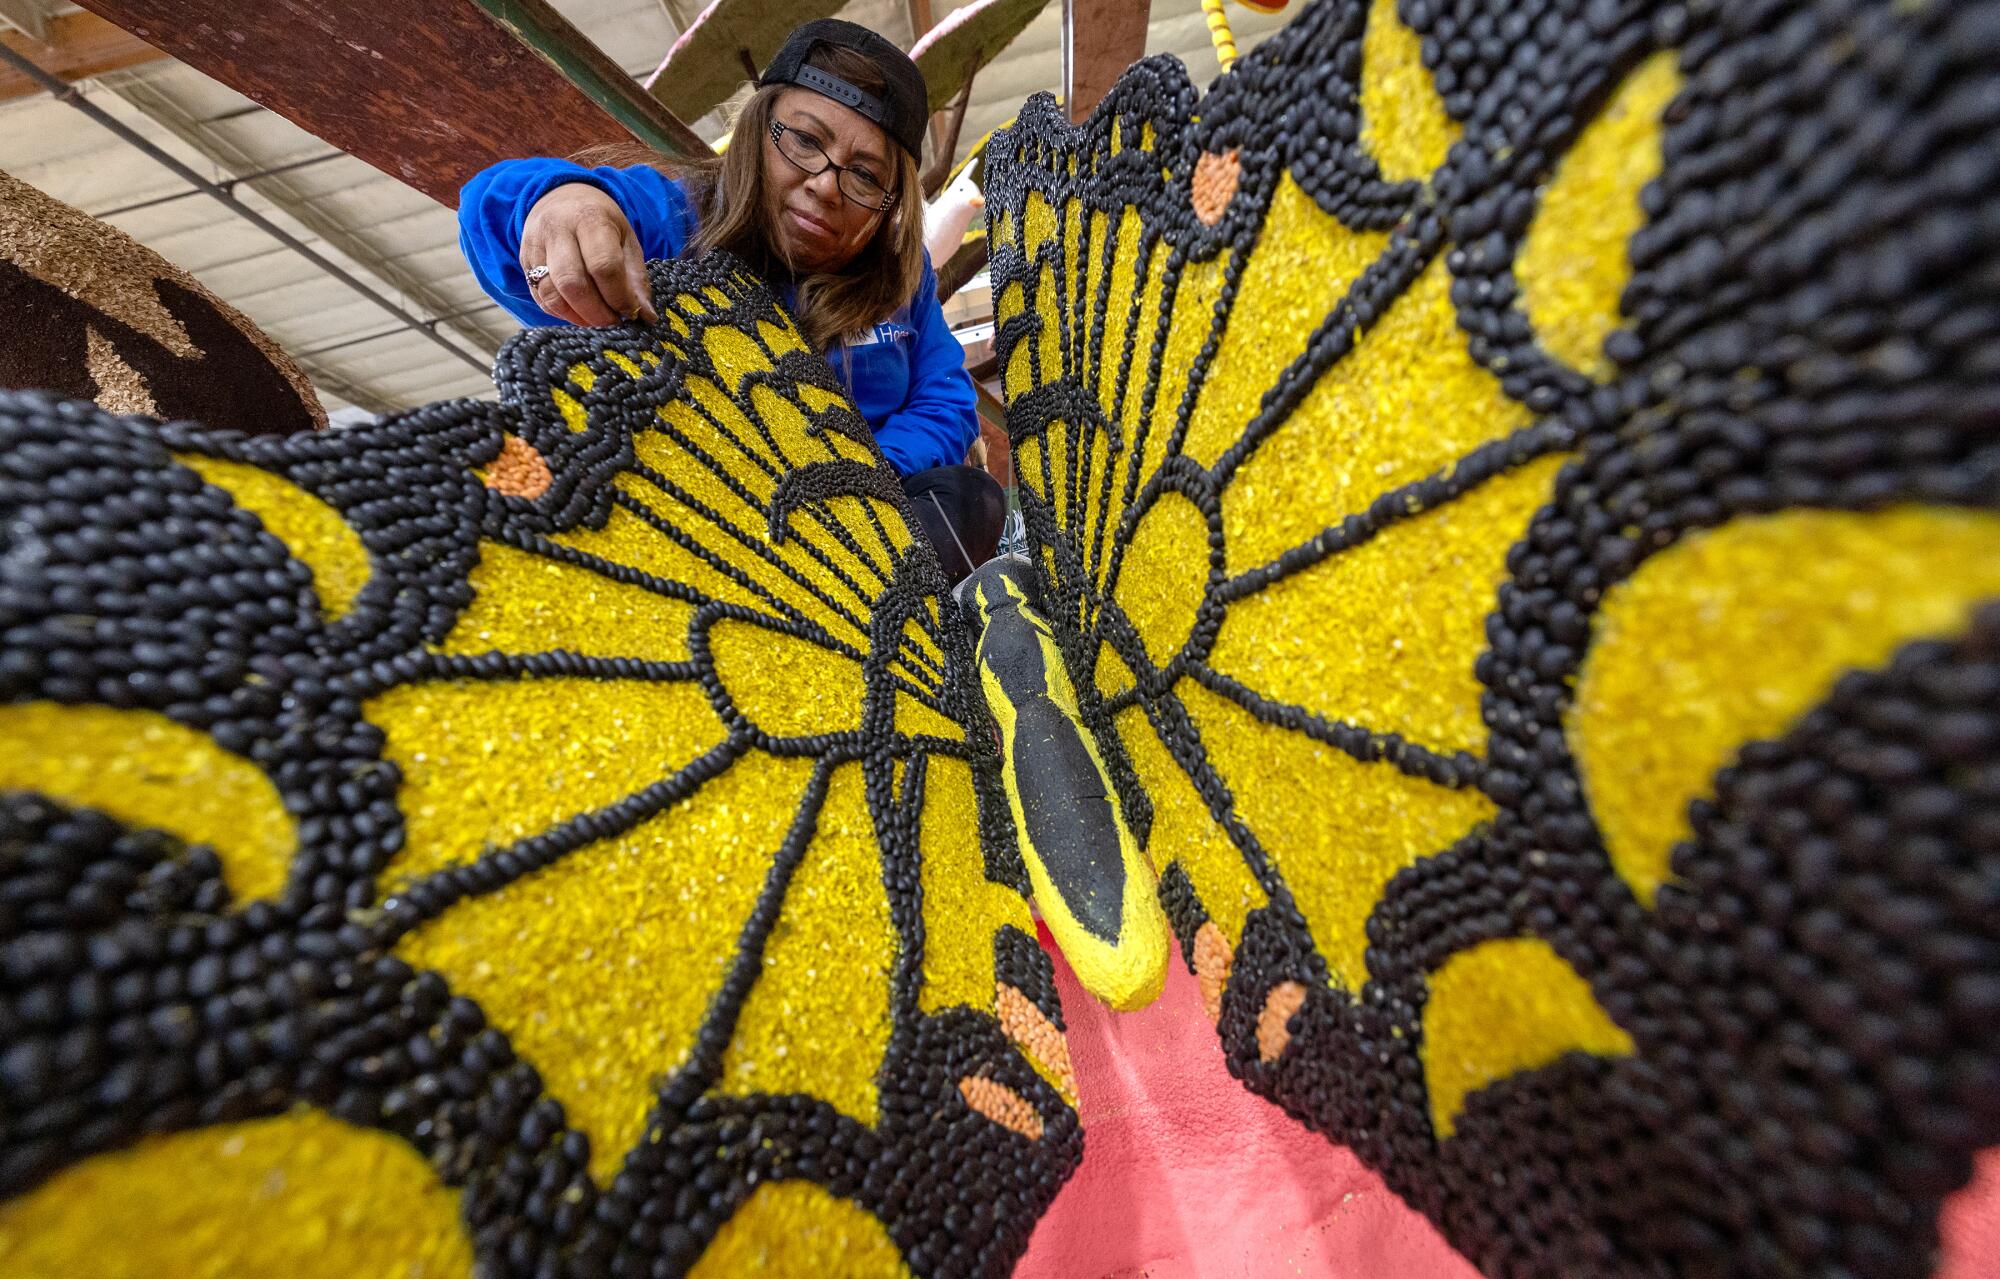 Volunteer Veronica Wold works on a yellow and black butterfly decoration on a Rose Parade float.